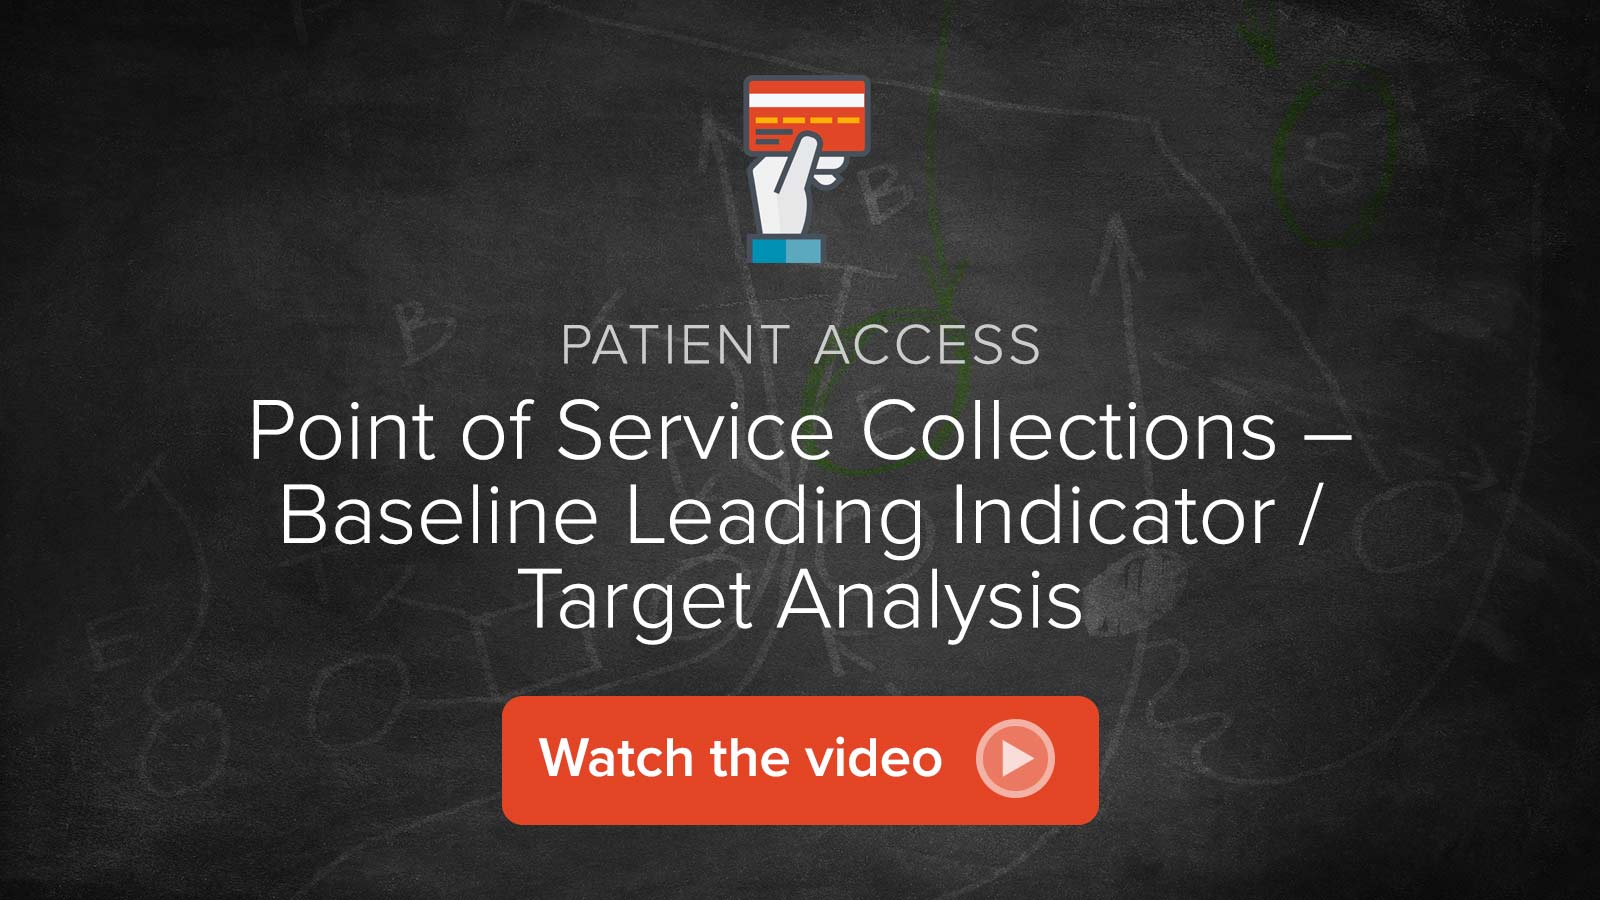 Watch the POS Collections – Baseline Leading Indicator / Target Analysis video